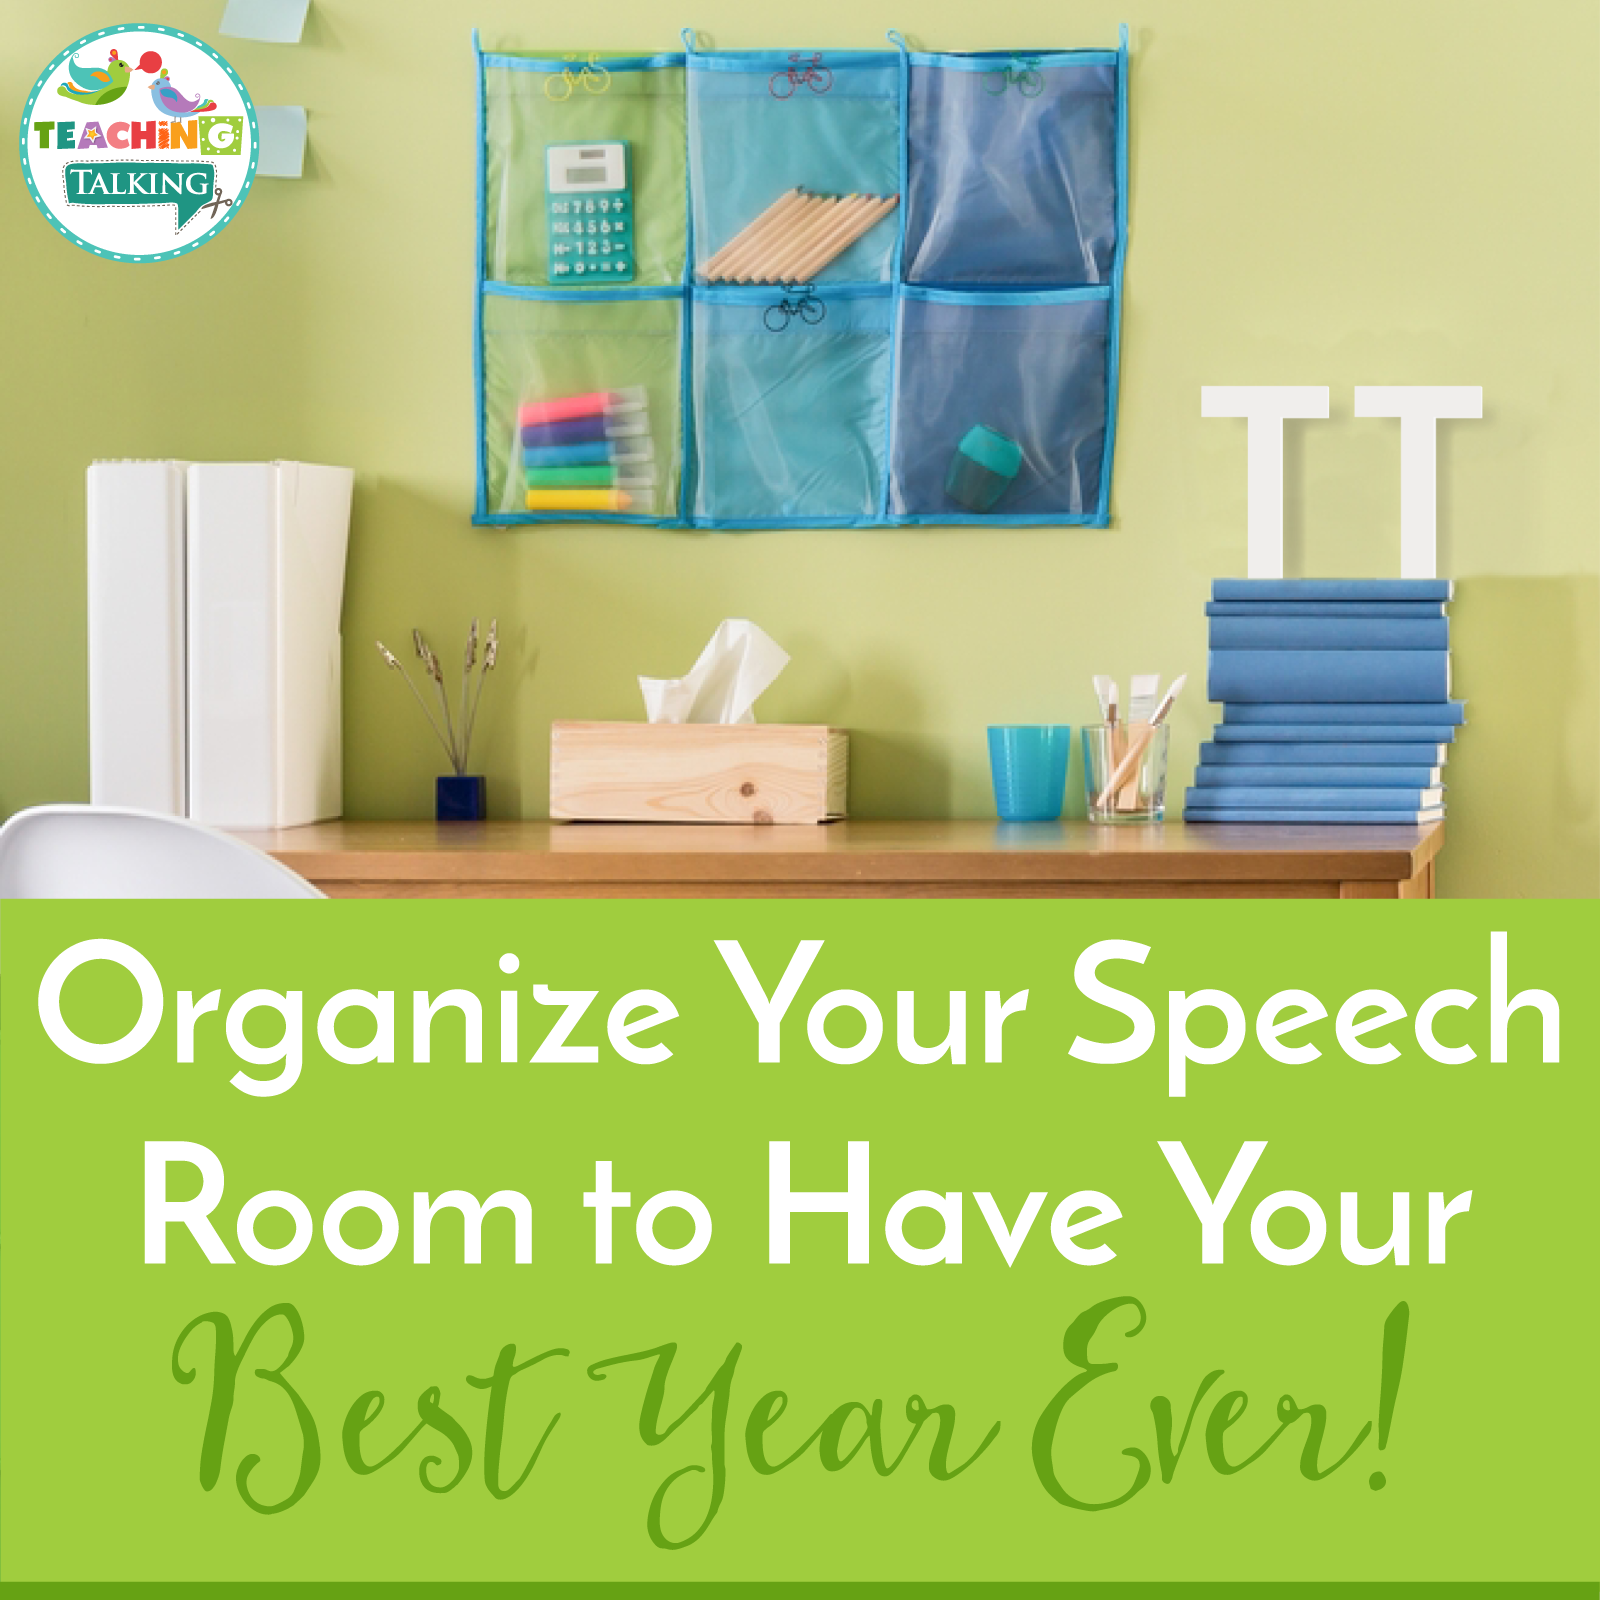 Speech Room Organization - Have Your Best Year Ever!